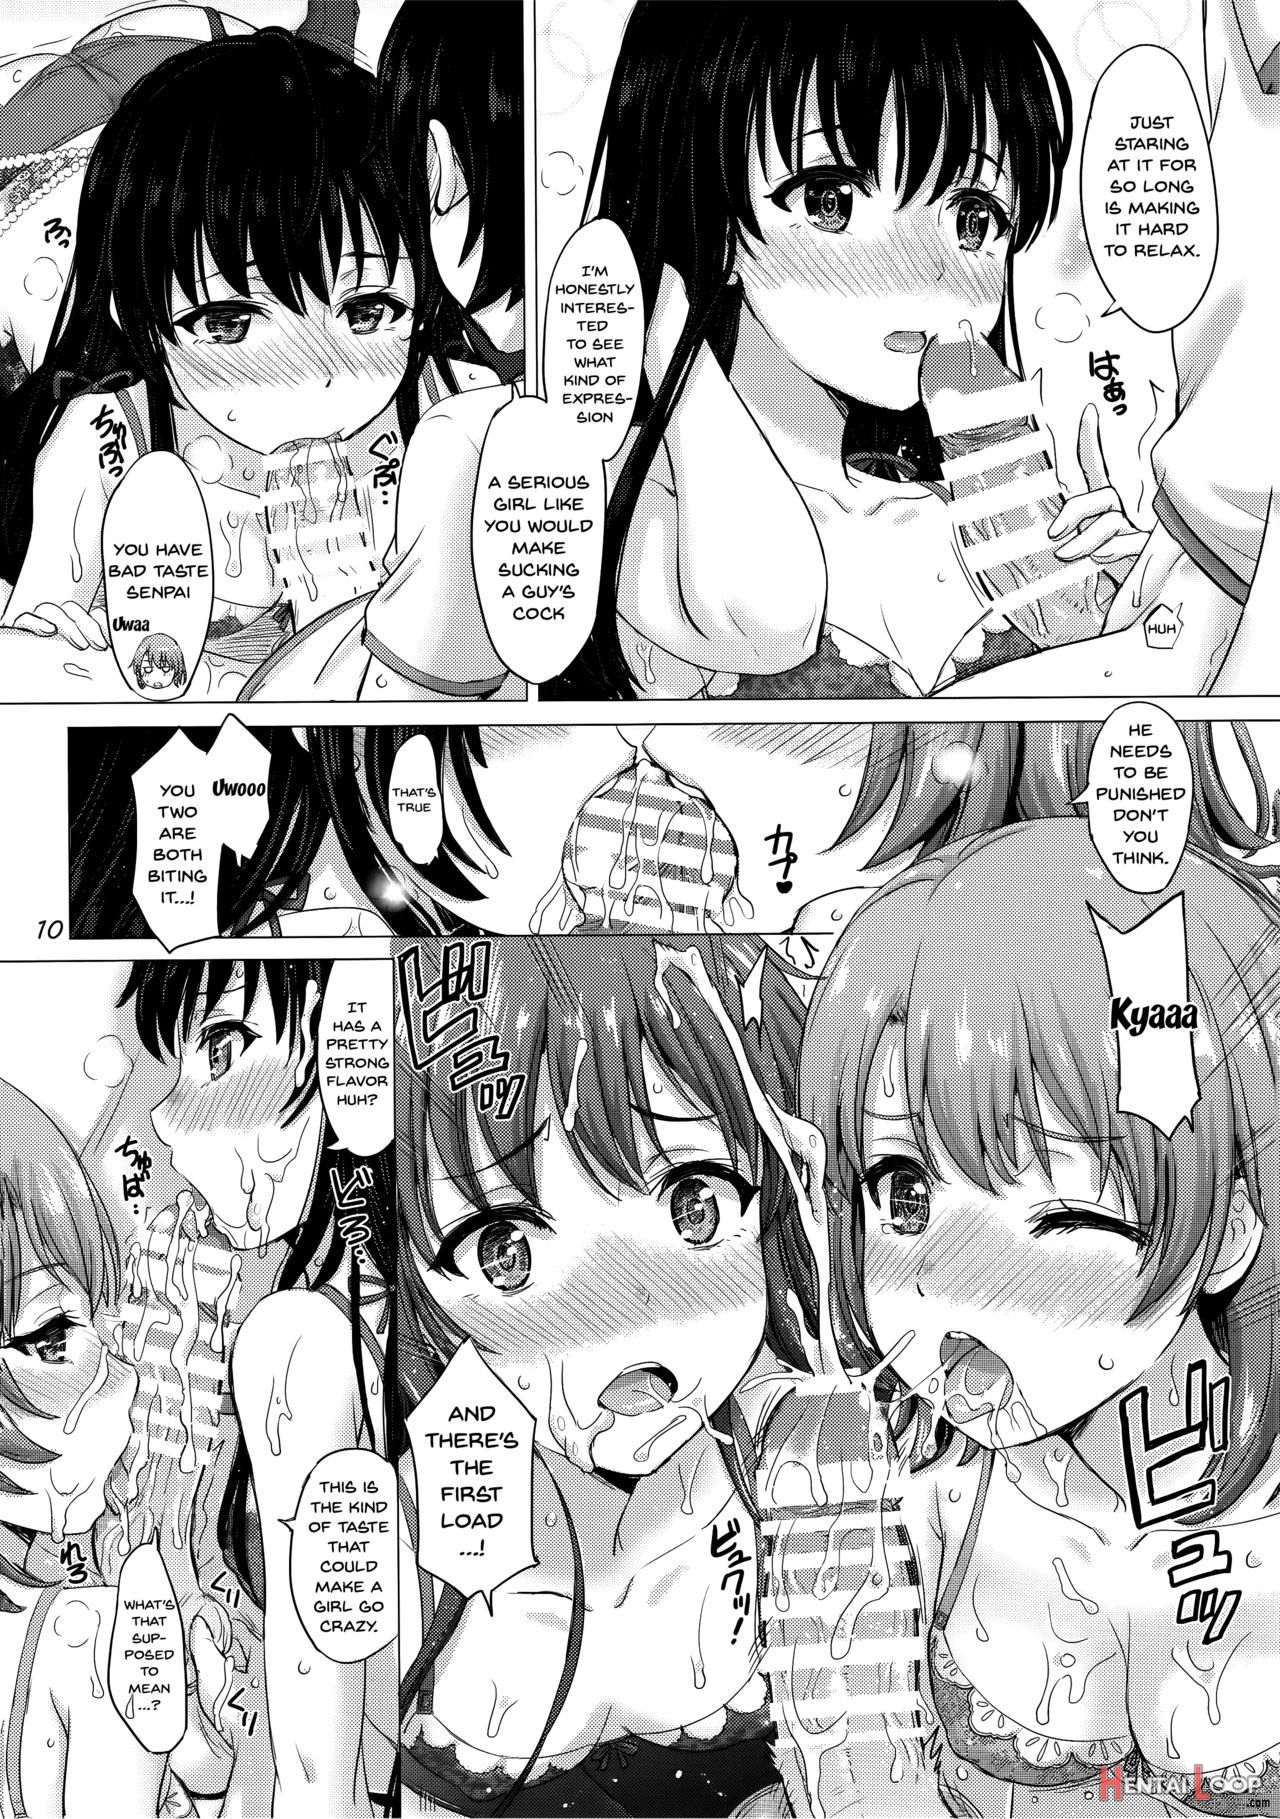 The Lewd Girls From The Service Club page 10